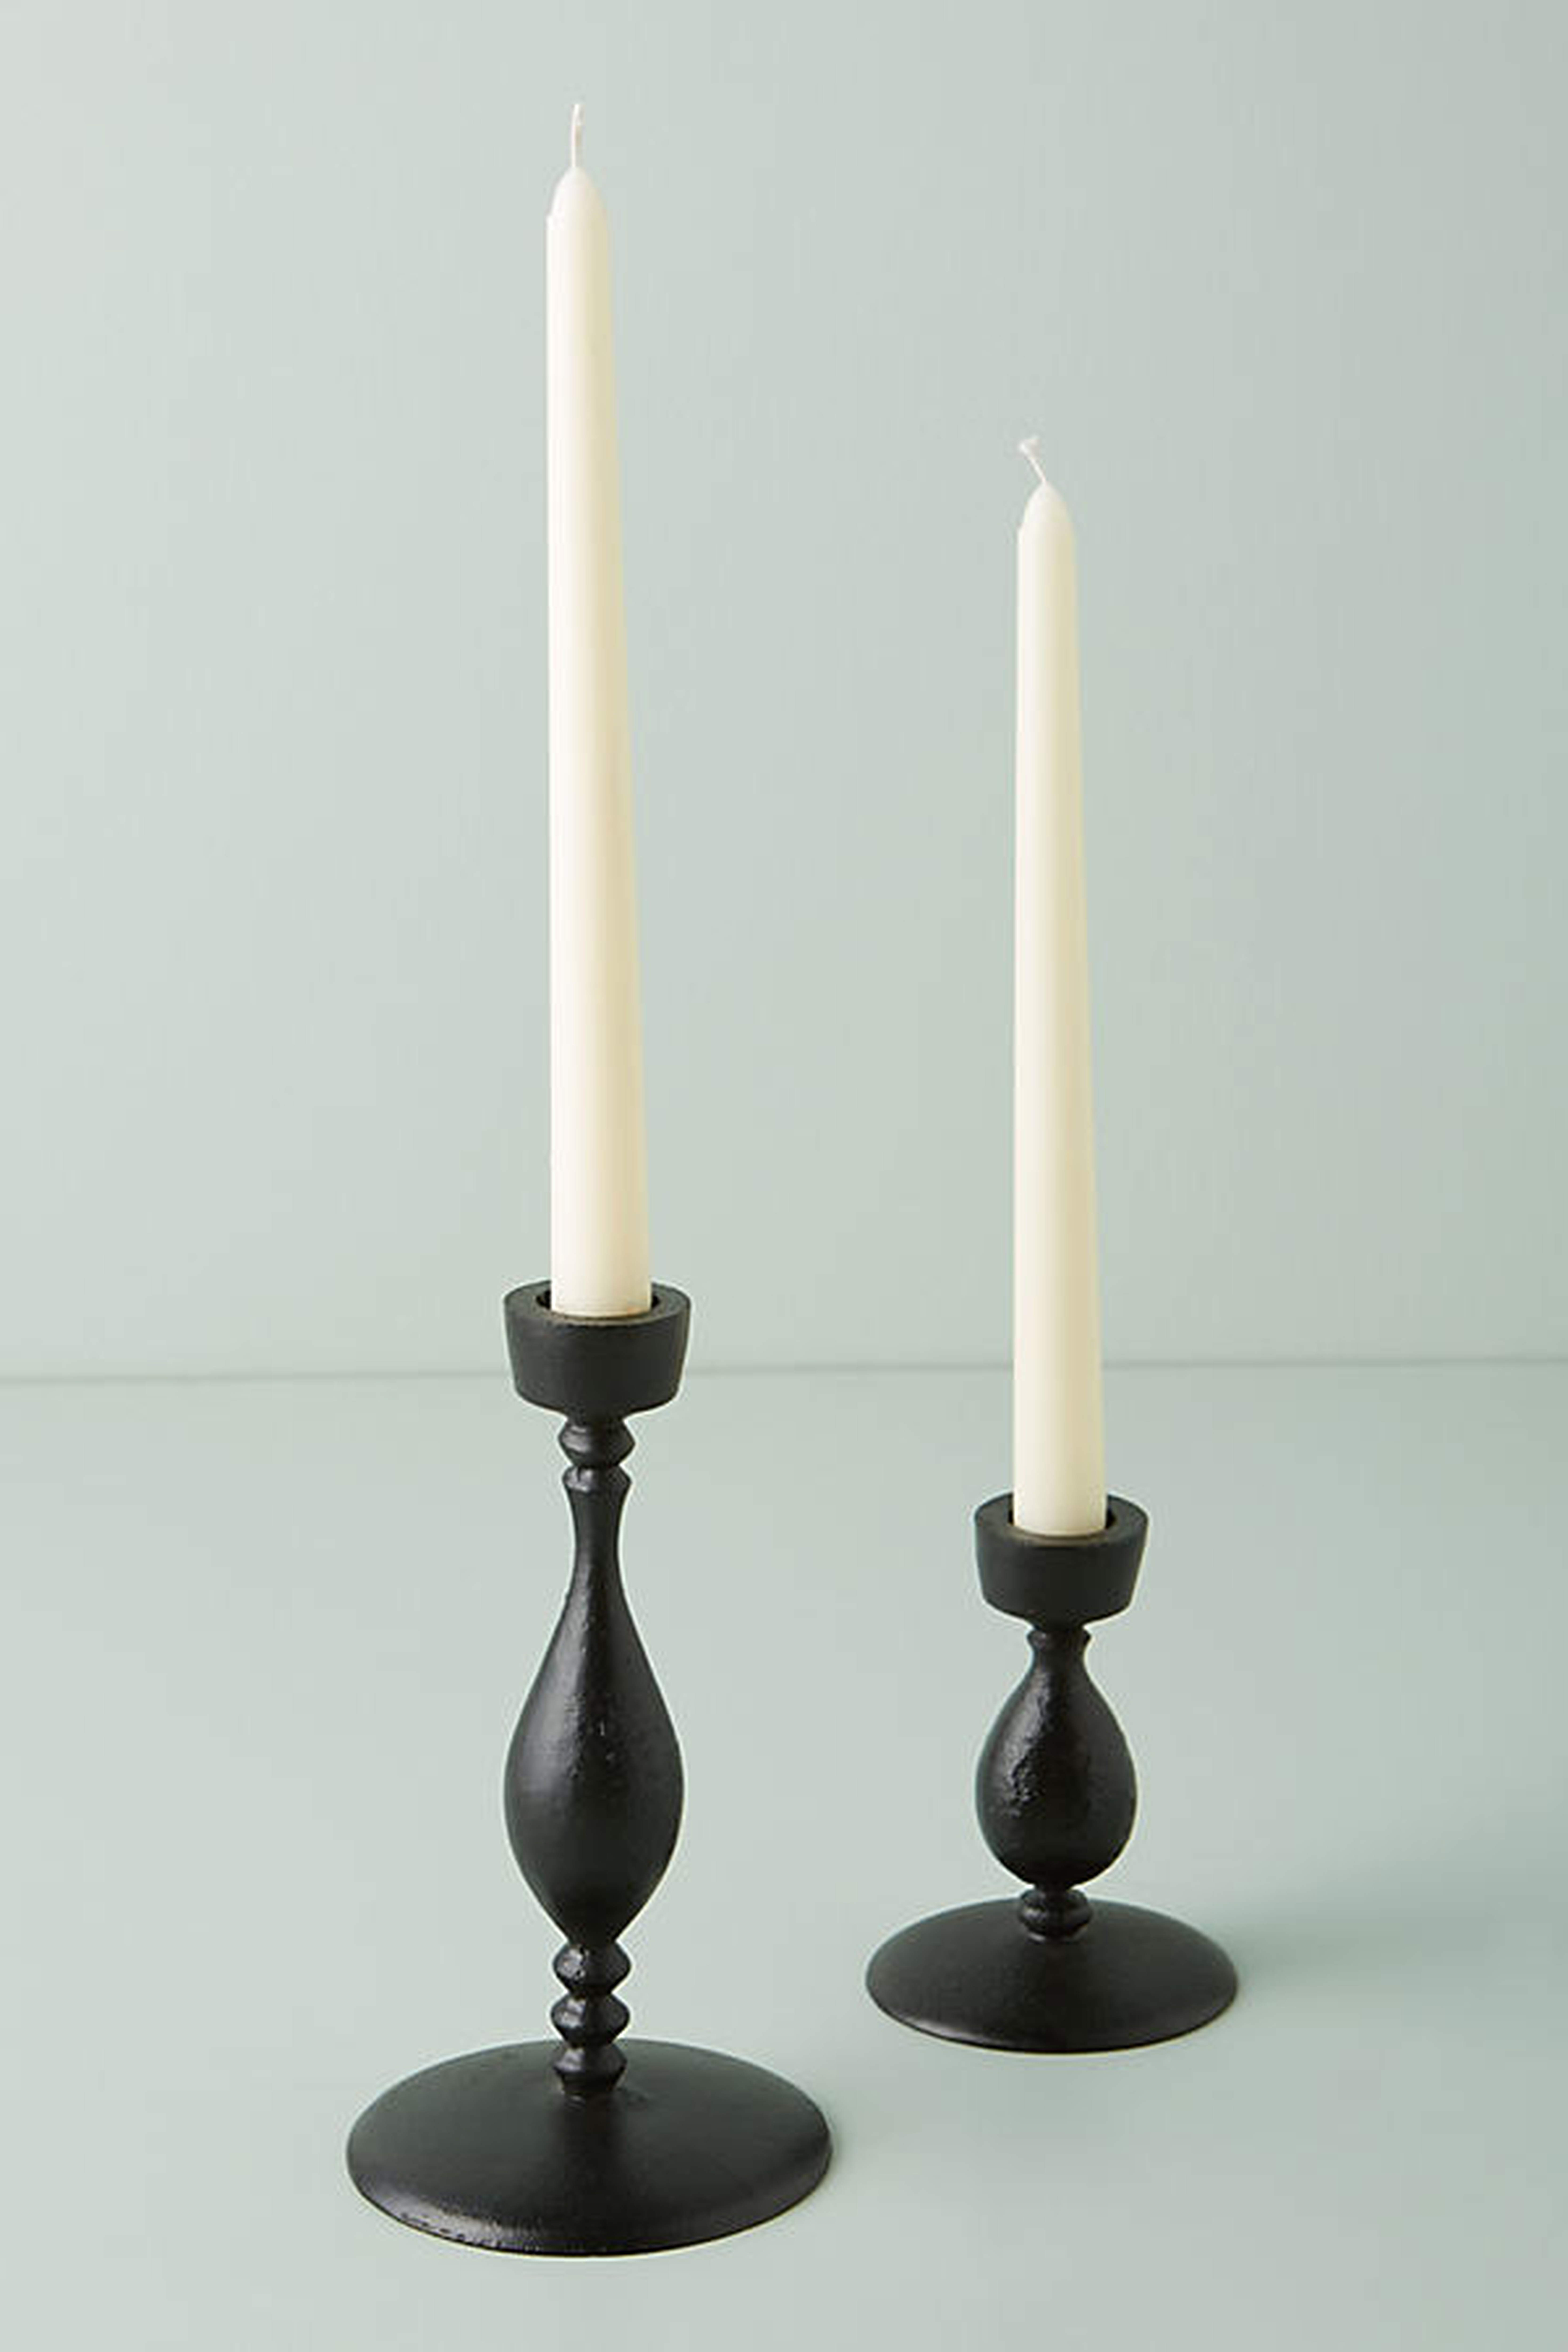 Victoria Taper Candle Holder By Anthropologie in Black Size L - Anthropologie